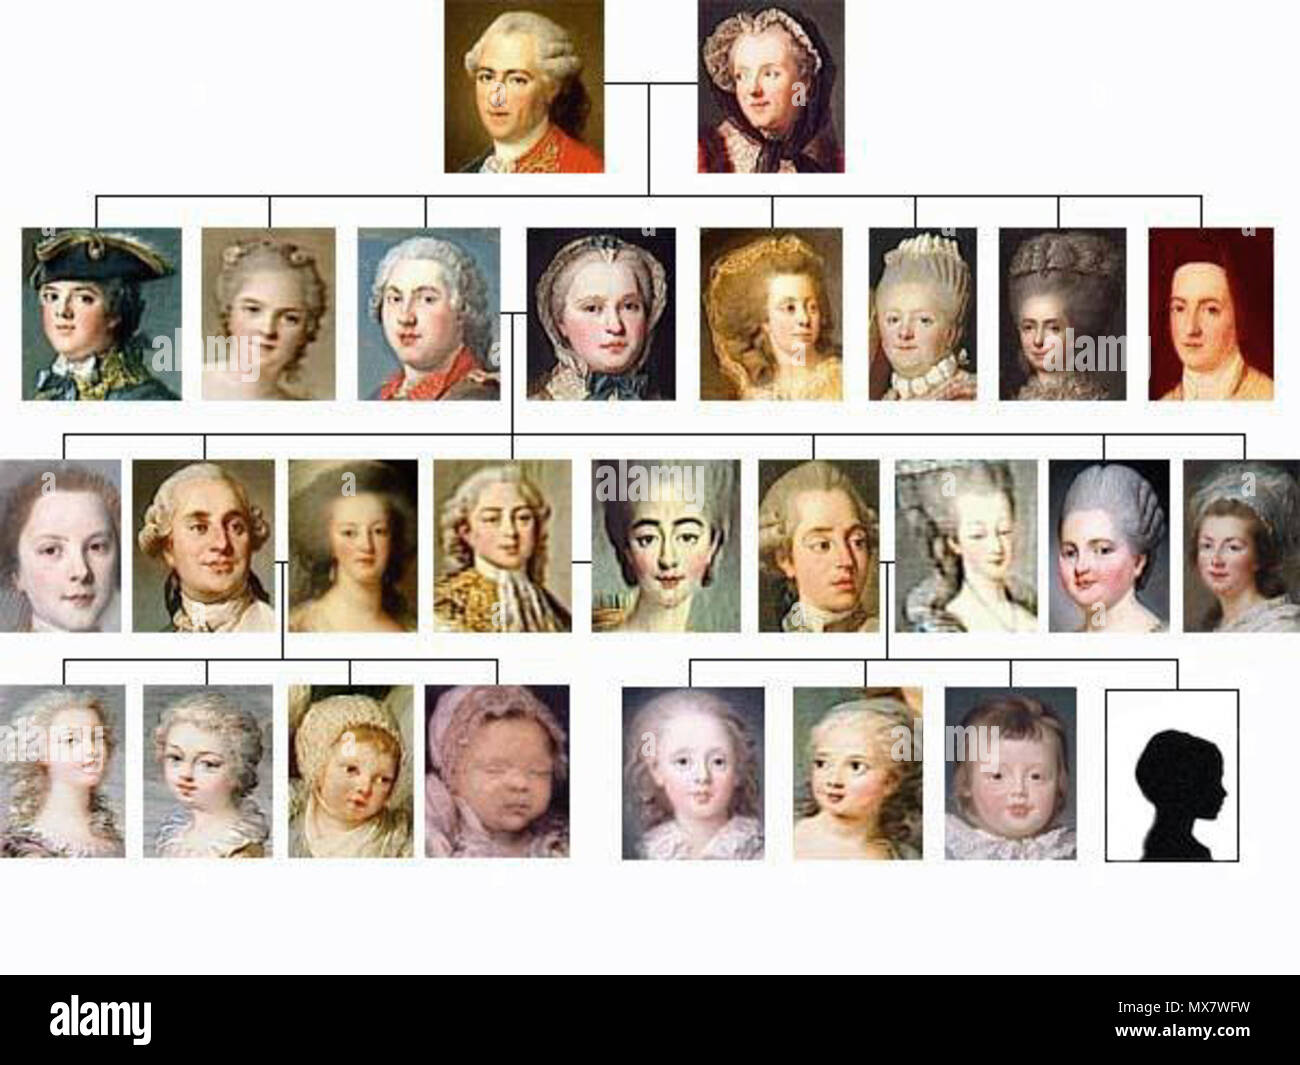 Family Tree Of Marie Therese Charlotte Of France Madame Royale